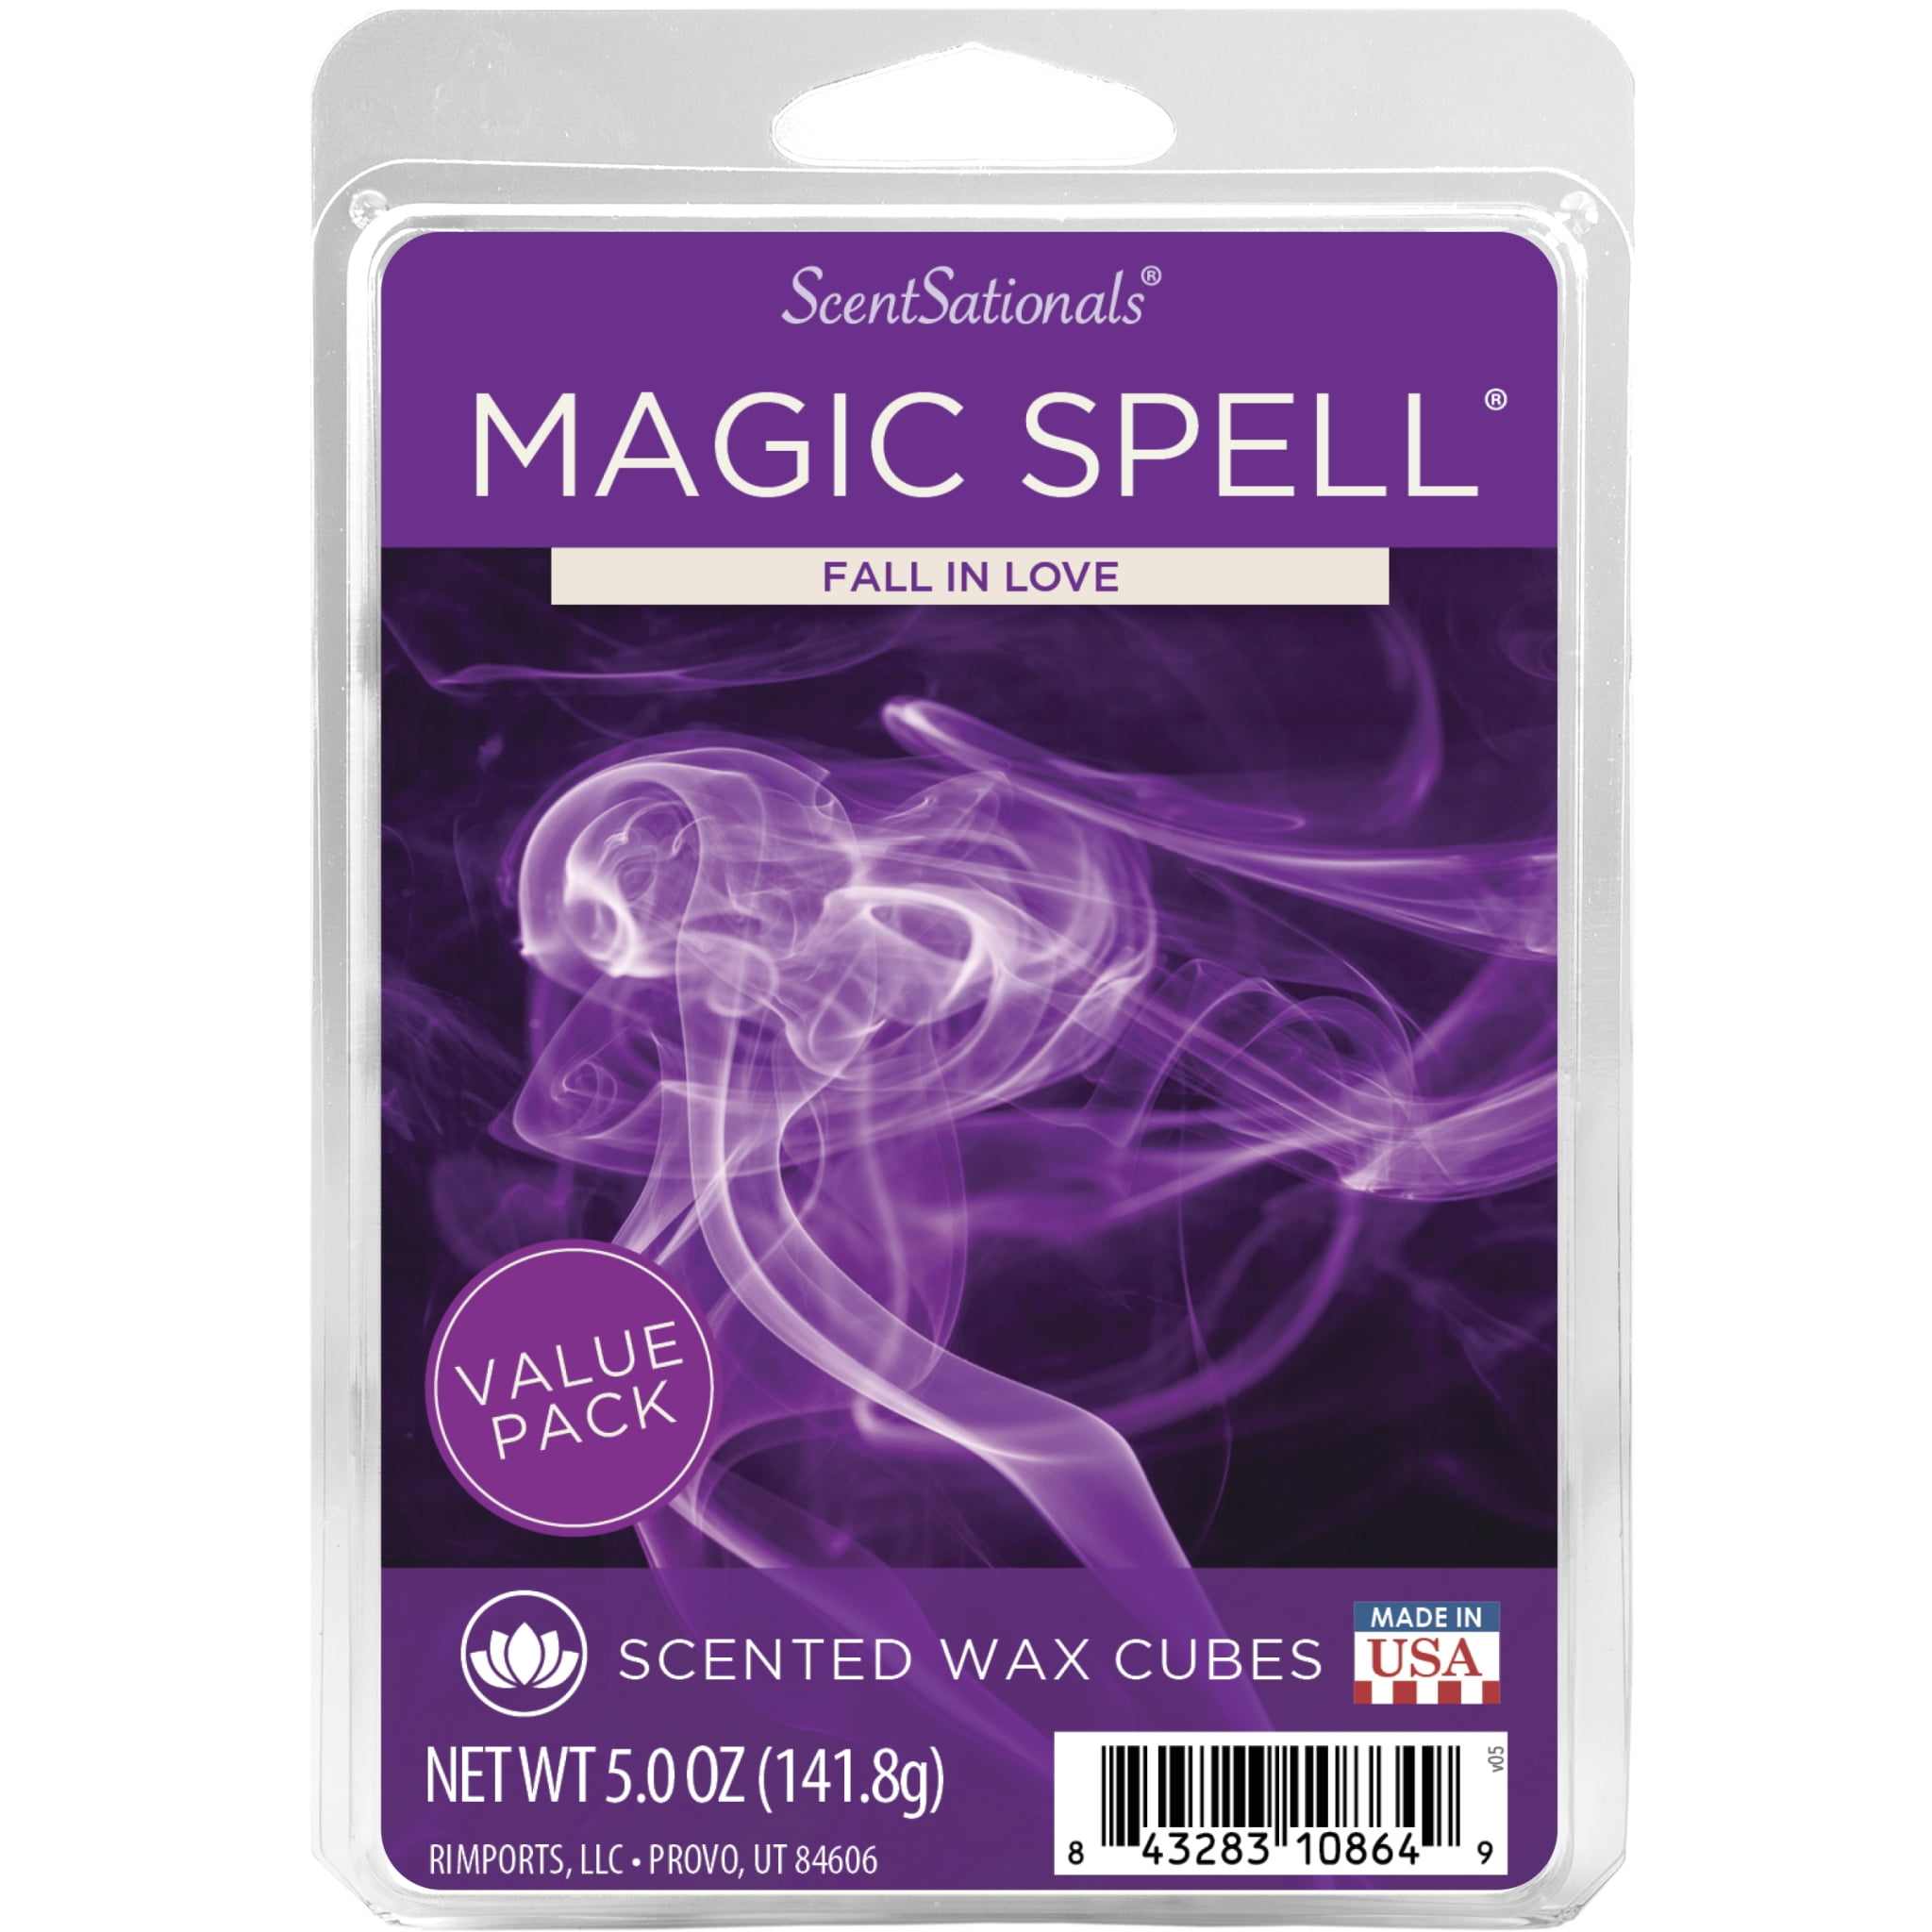 Love Spell Scented Wax Melt Tarts, Pack of 4 